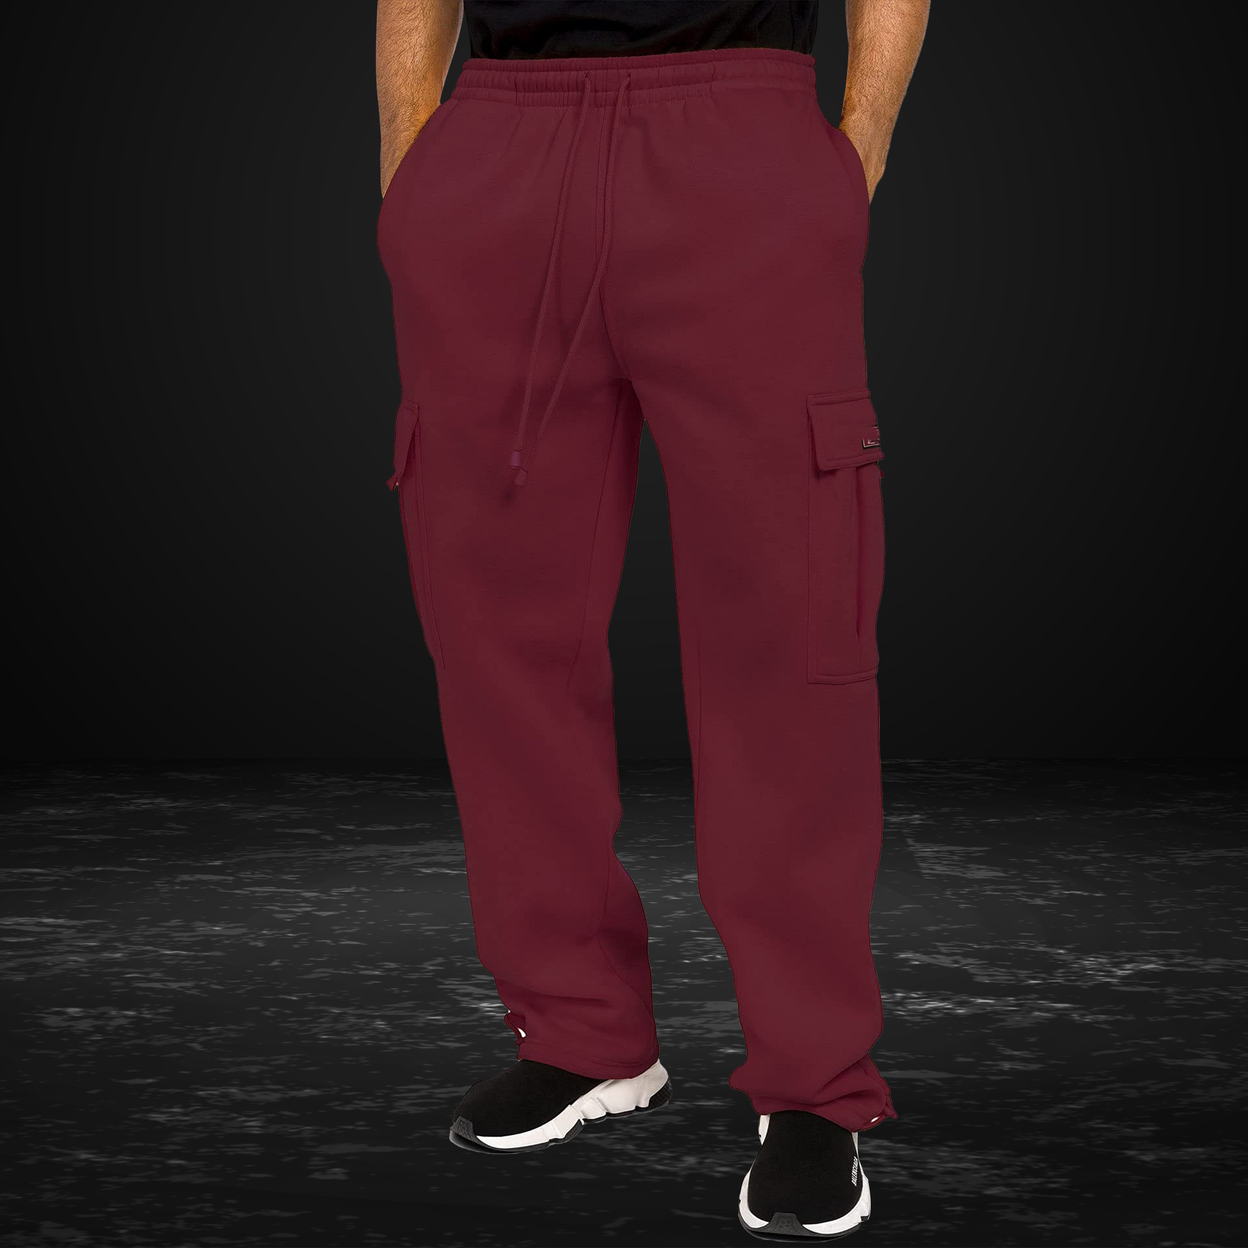 Multipack Men's Casual Solid Cargo Jogger Sweatpants With Pockets - 1, Xl